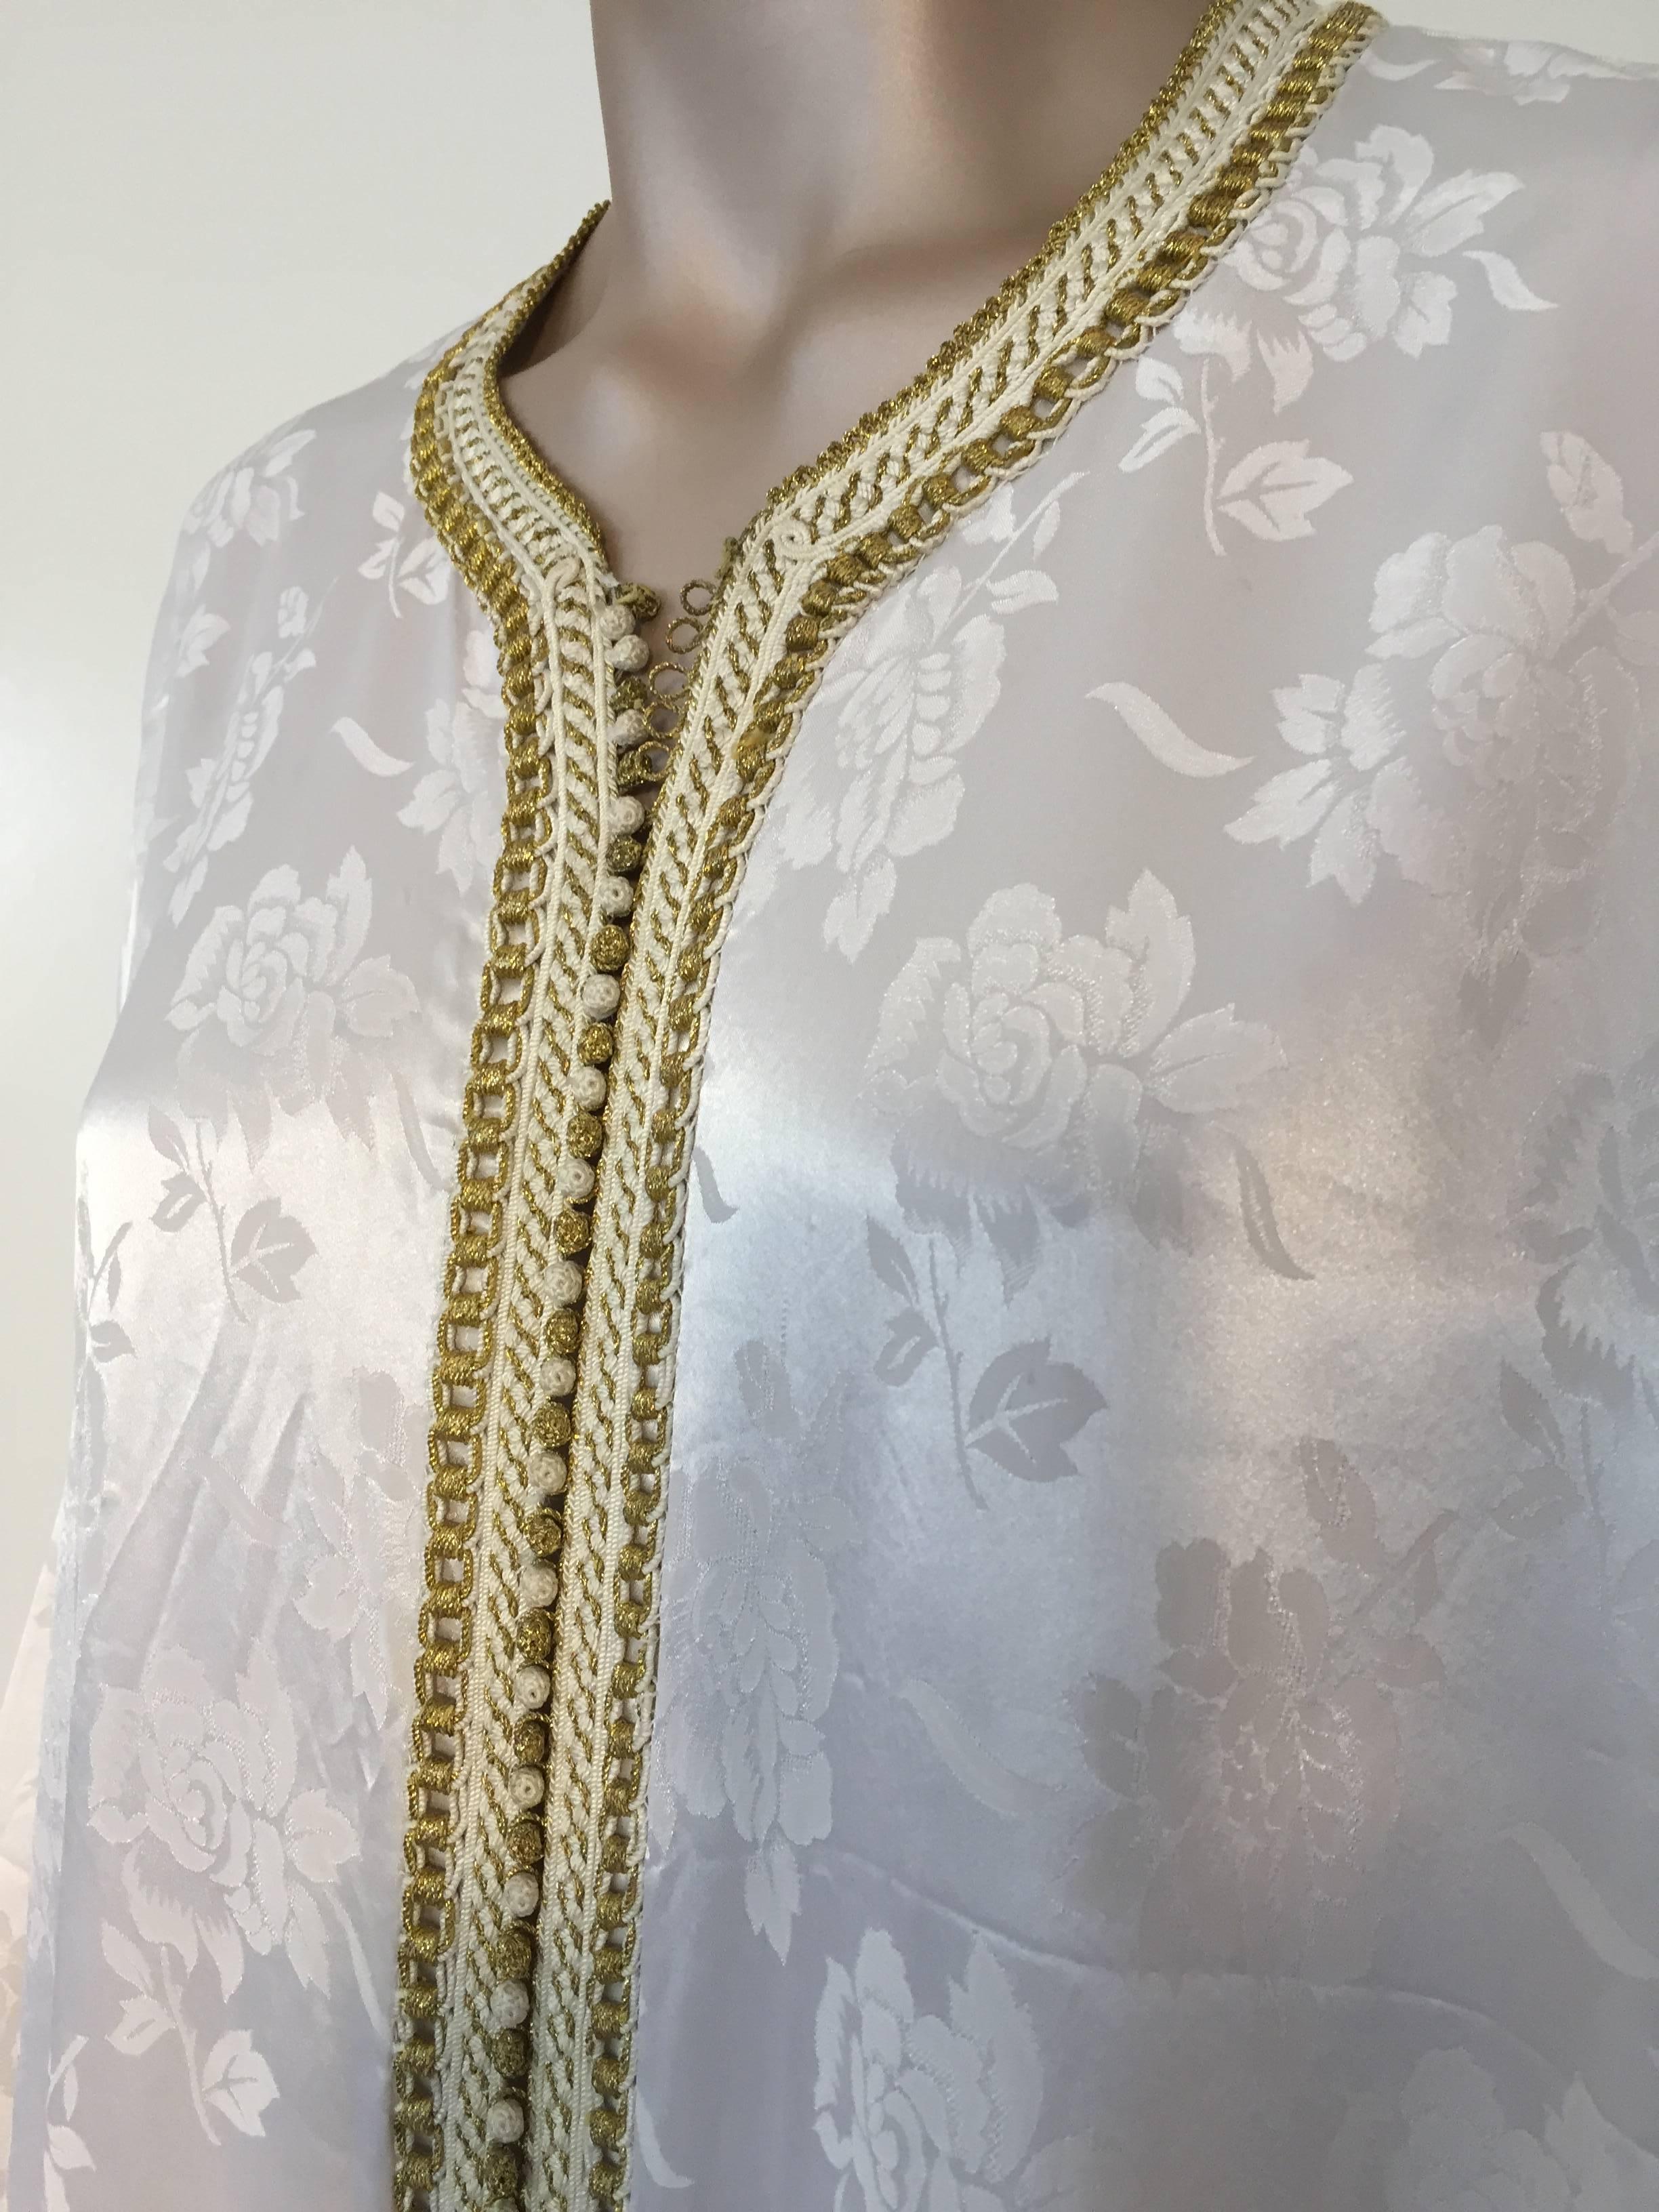 Moorish Moroccan Caftan Gown White Embroidered with Gold Trim, circa 1970 For Sale